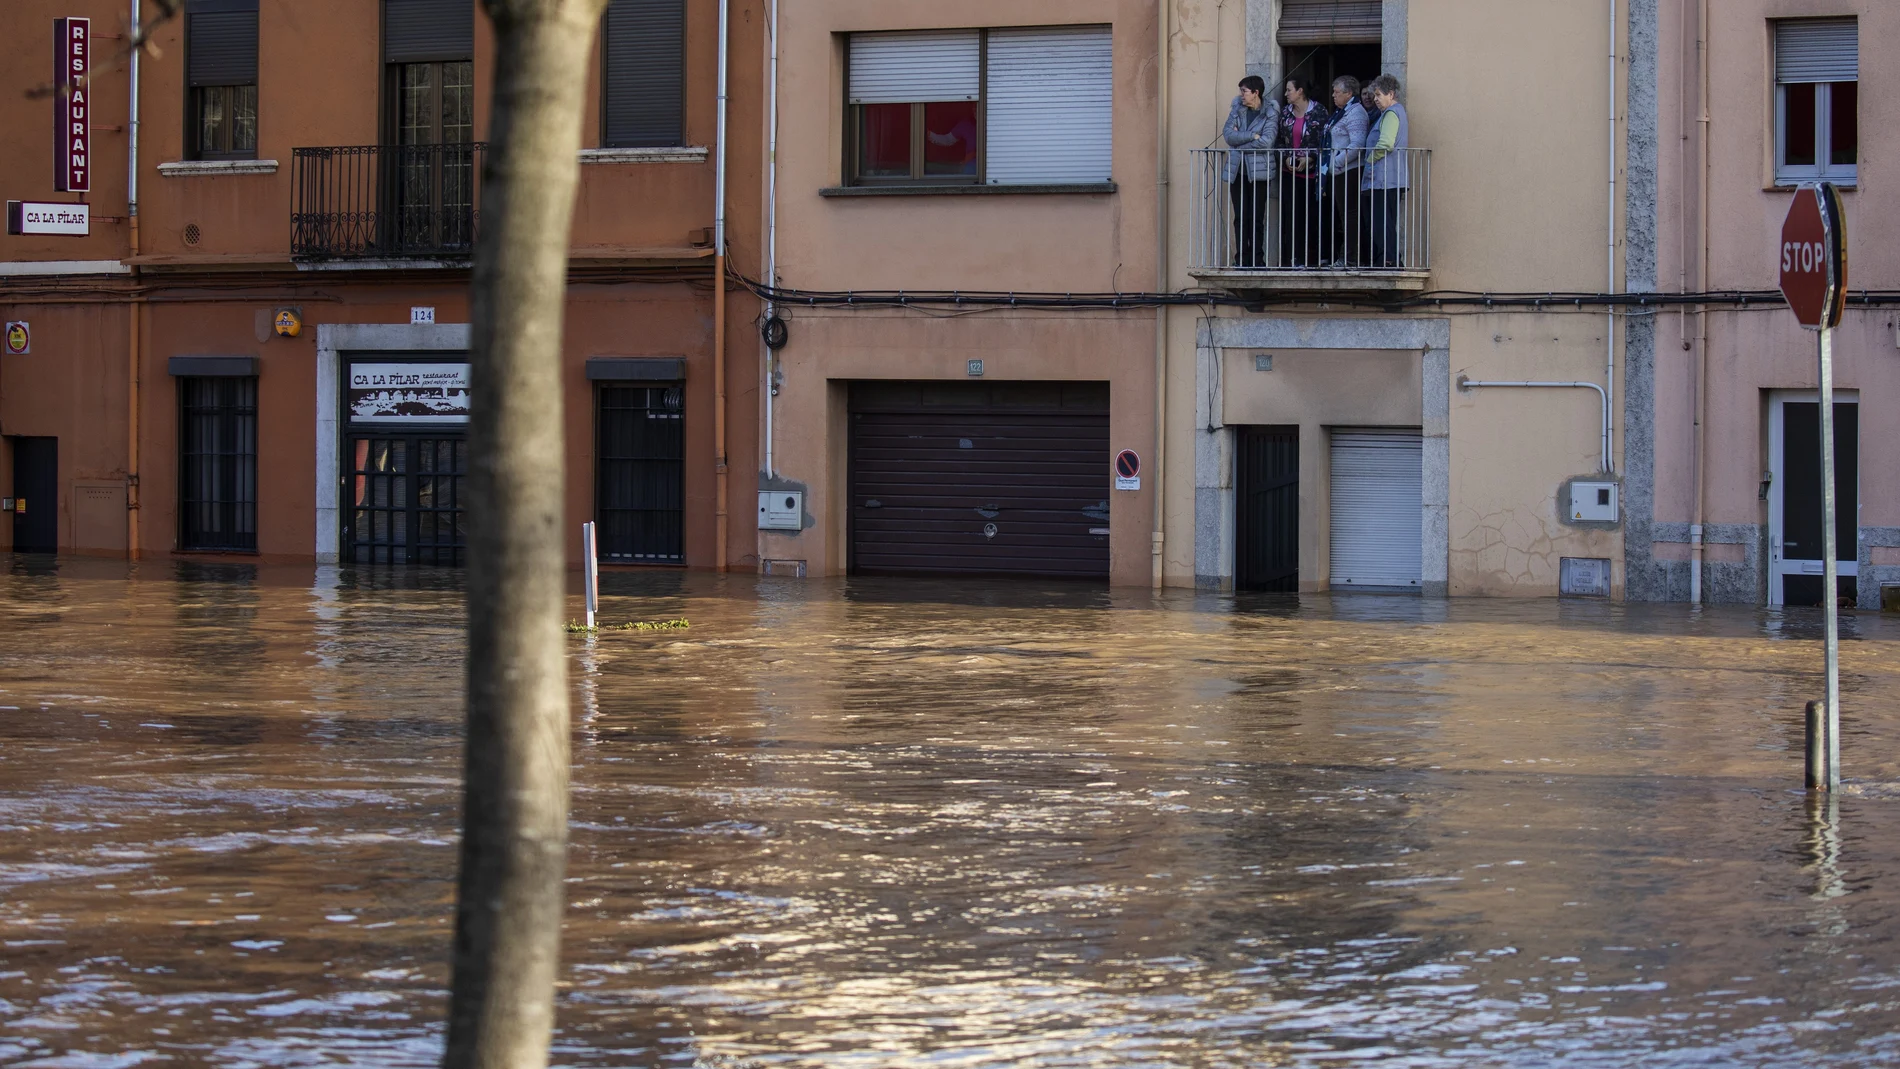 People stand at a balcony during flooding following a storm in Girona, Spain, on Thursday, Jan. 23, 2020. At least 11 have died and five people remained missing on Thursday following a calamitous storm that has caused rivers to overflow and sea waters to inundate vast agricultural areas in eastern Spain. (AP Photo/Emilio Morenatti)